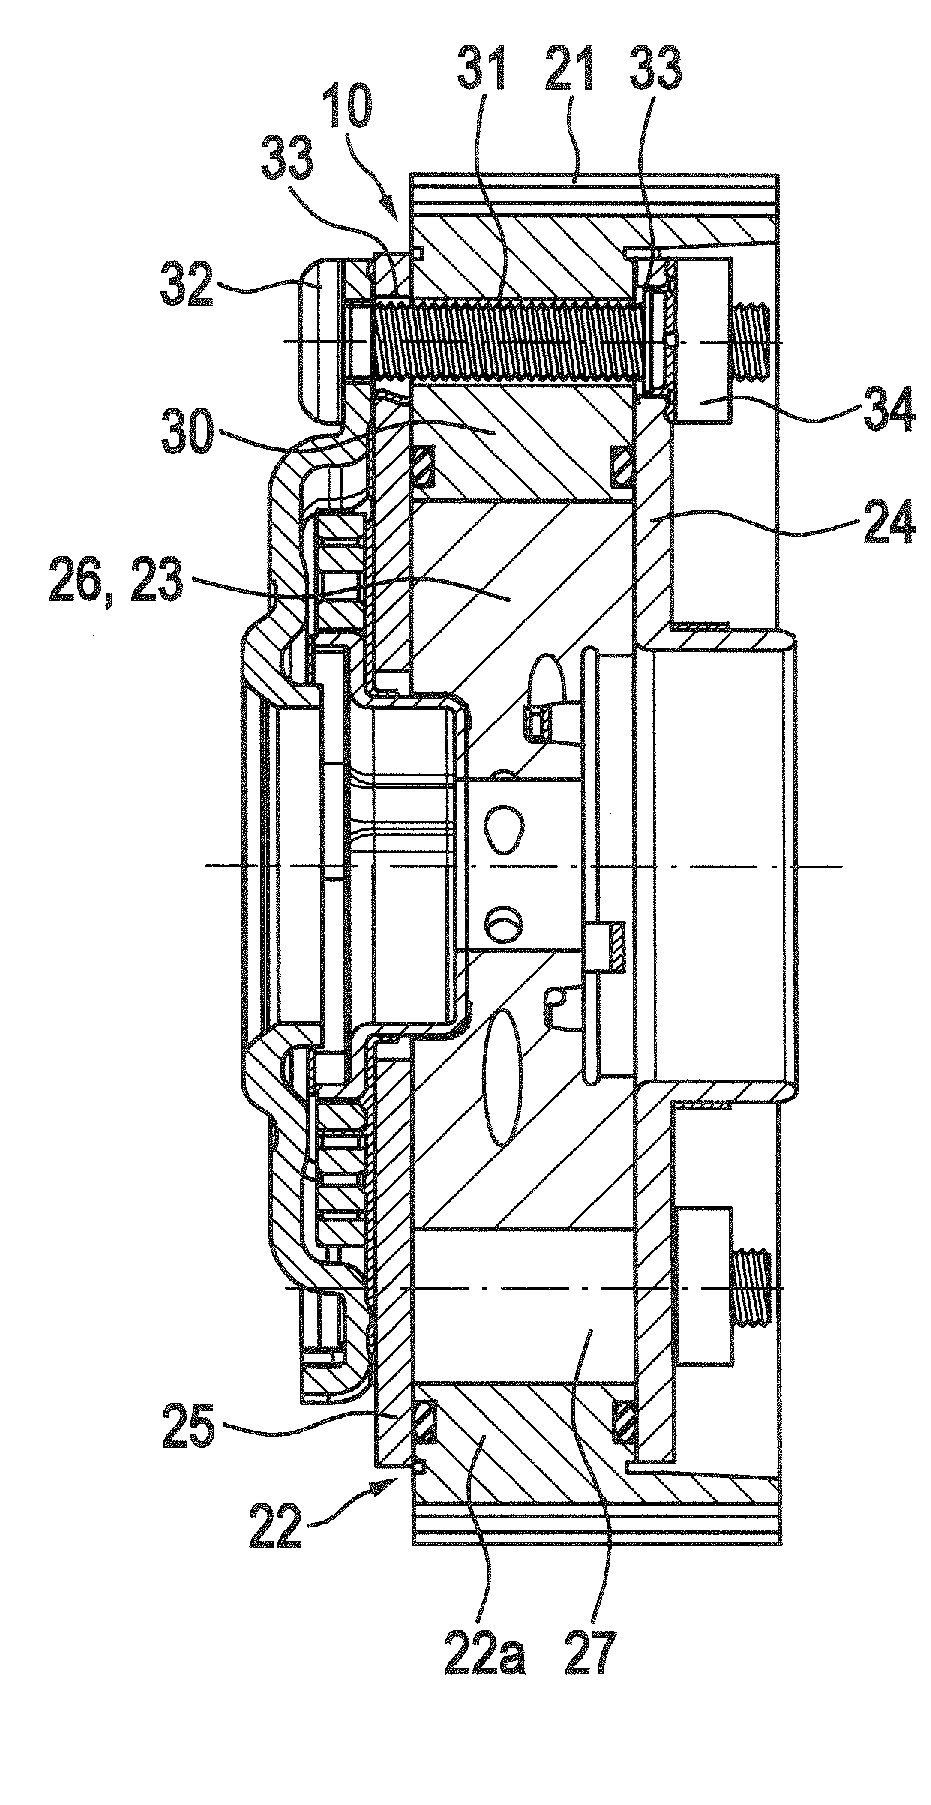 Apparatus for the variable setting of the control times of gas exchange valves of an internal combustion engine